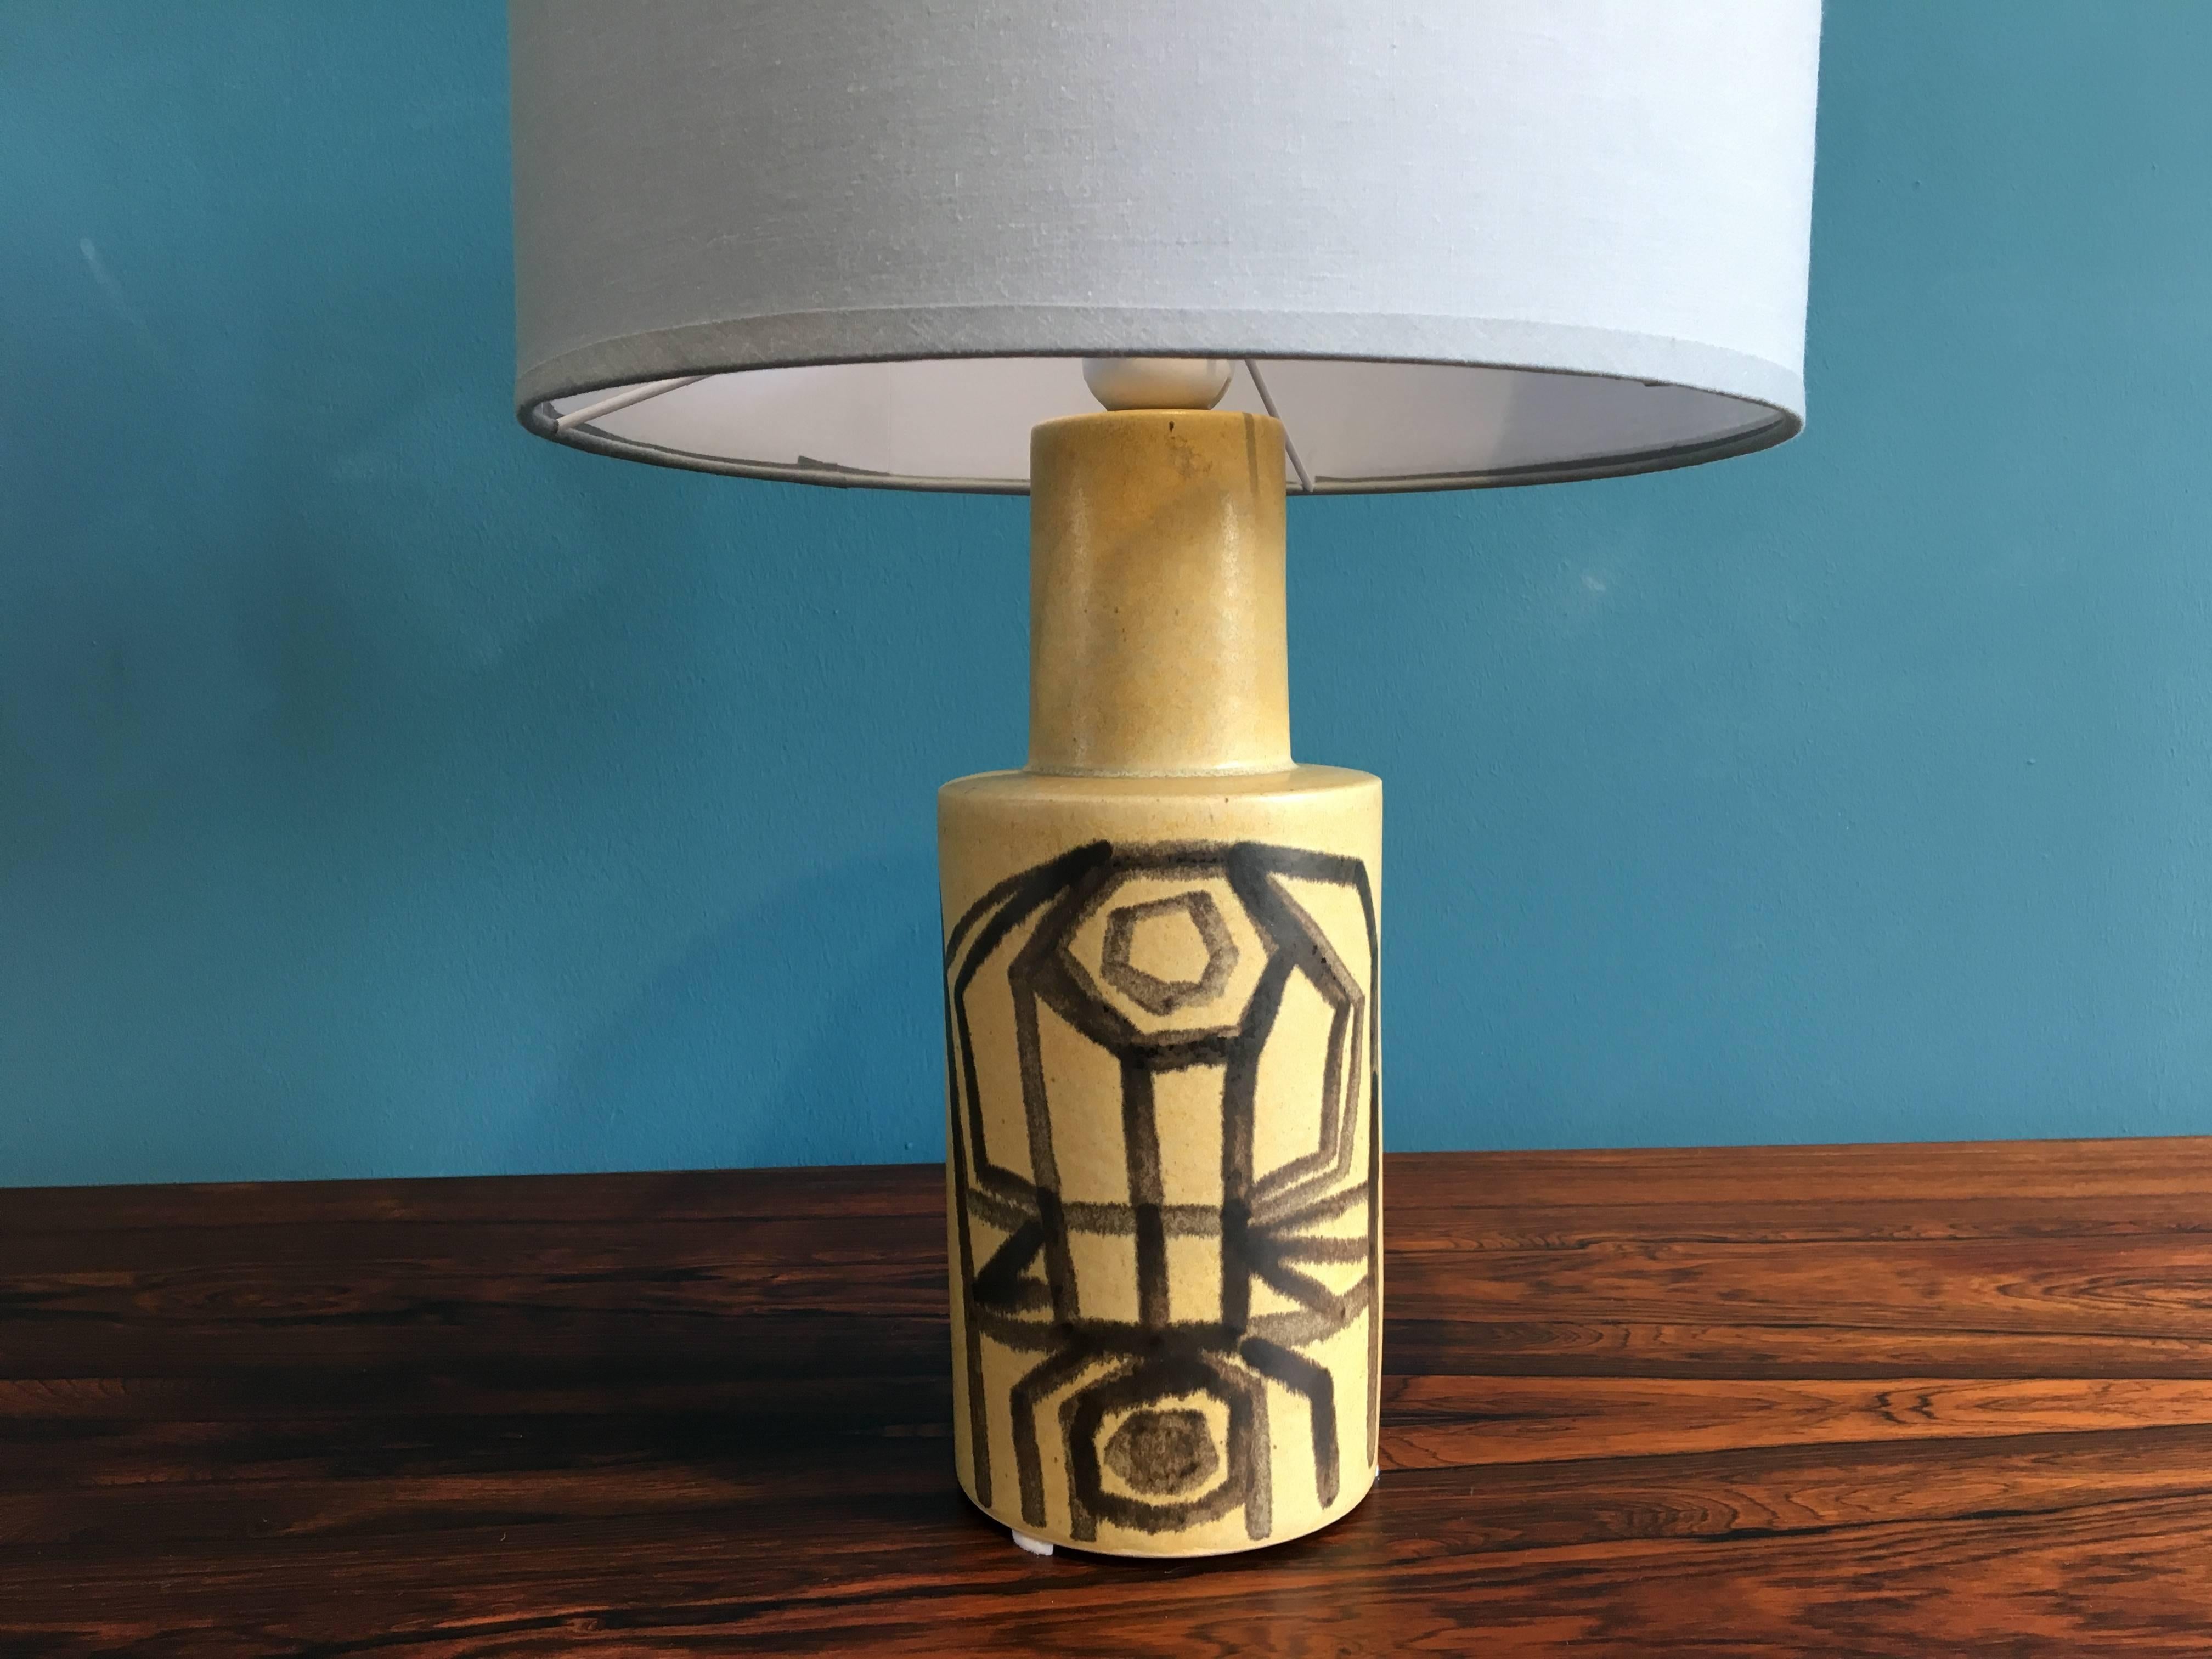 This table lamp was produced by Danish company Okela in the 1970s. It is made of ceramic and features a graphic pattern on the front. The lamp has been rewired with a switch and has a new socket and shade.